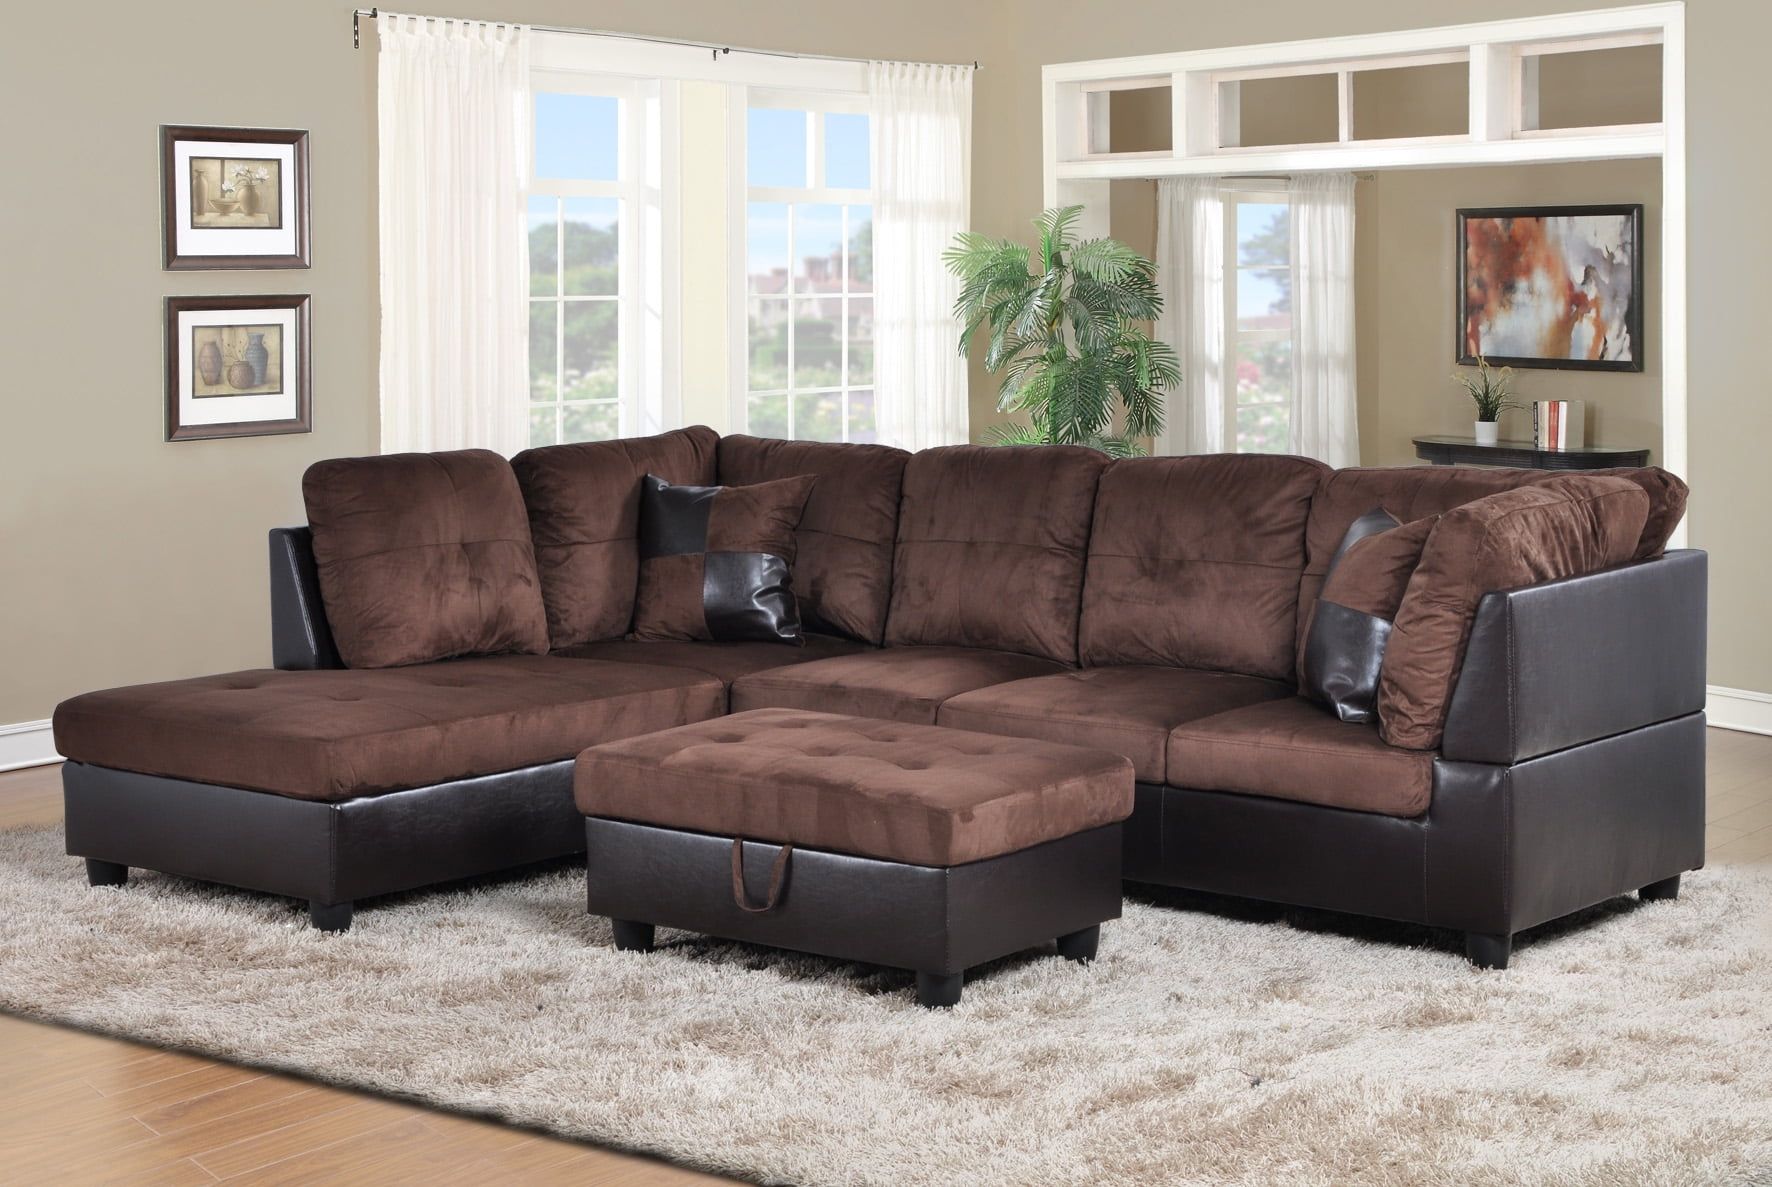 Ponliving Furniture Hermann Left Chaise Sectional Sofa With Storage Throughout Sofas With Ottomans In Brown (Gallery 3 of 20)